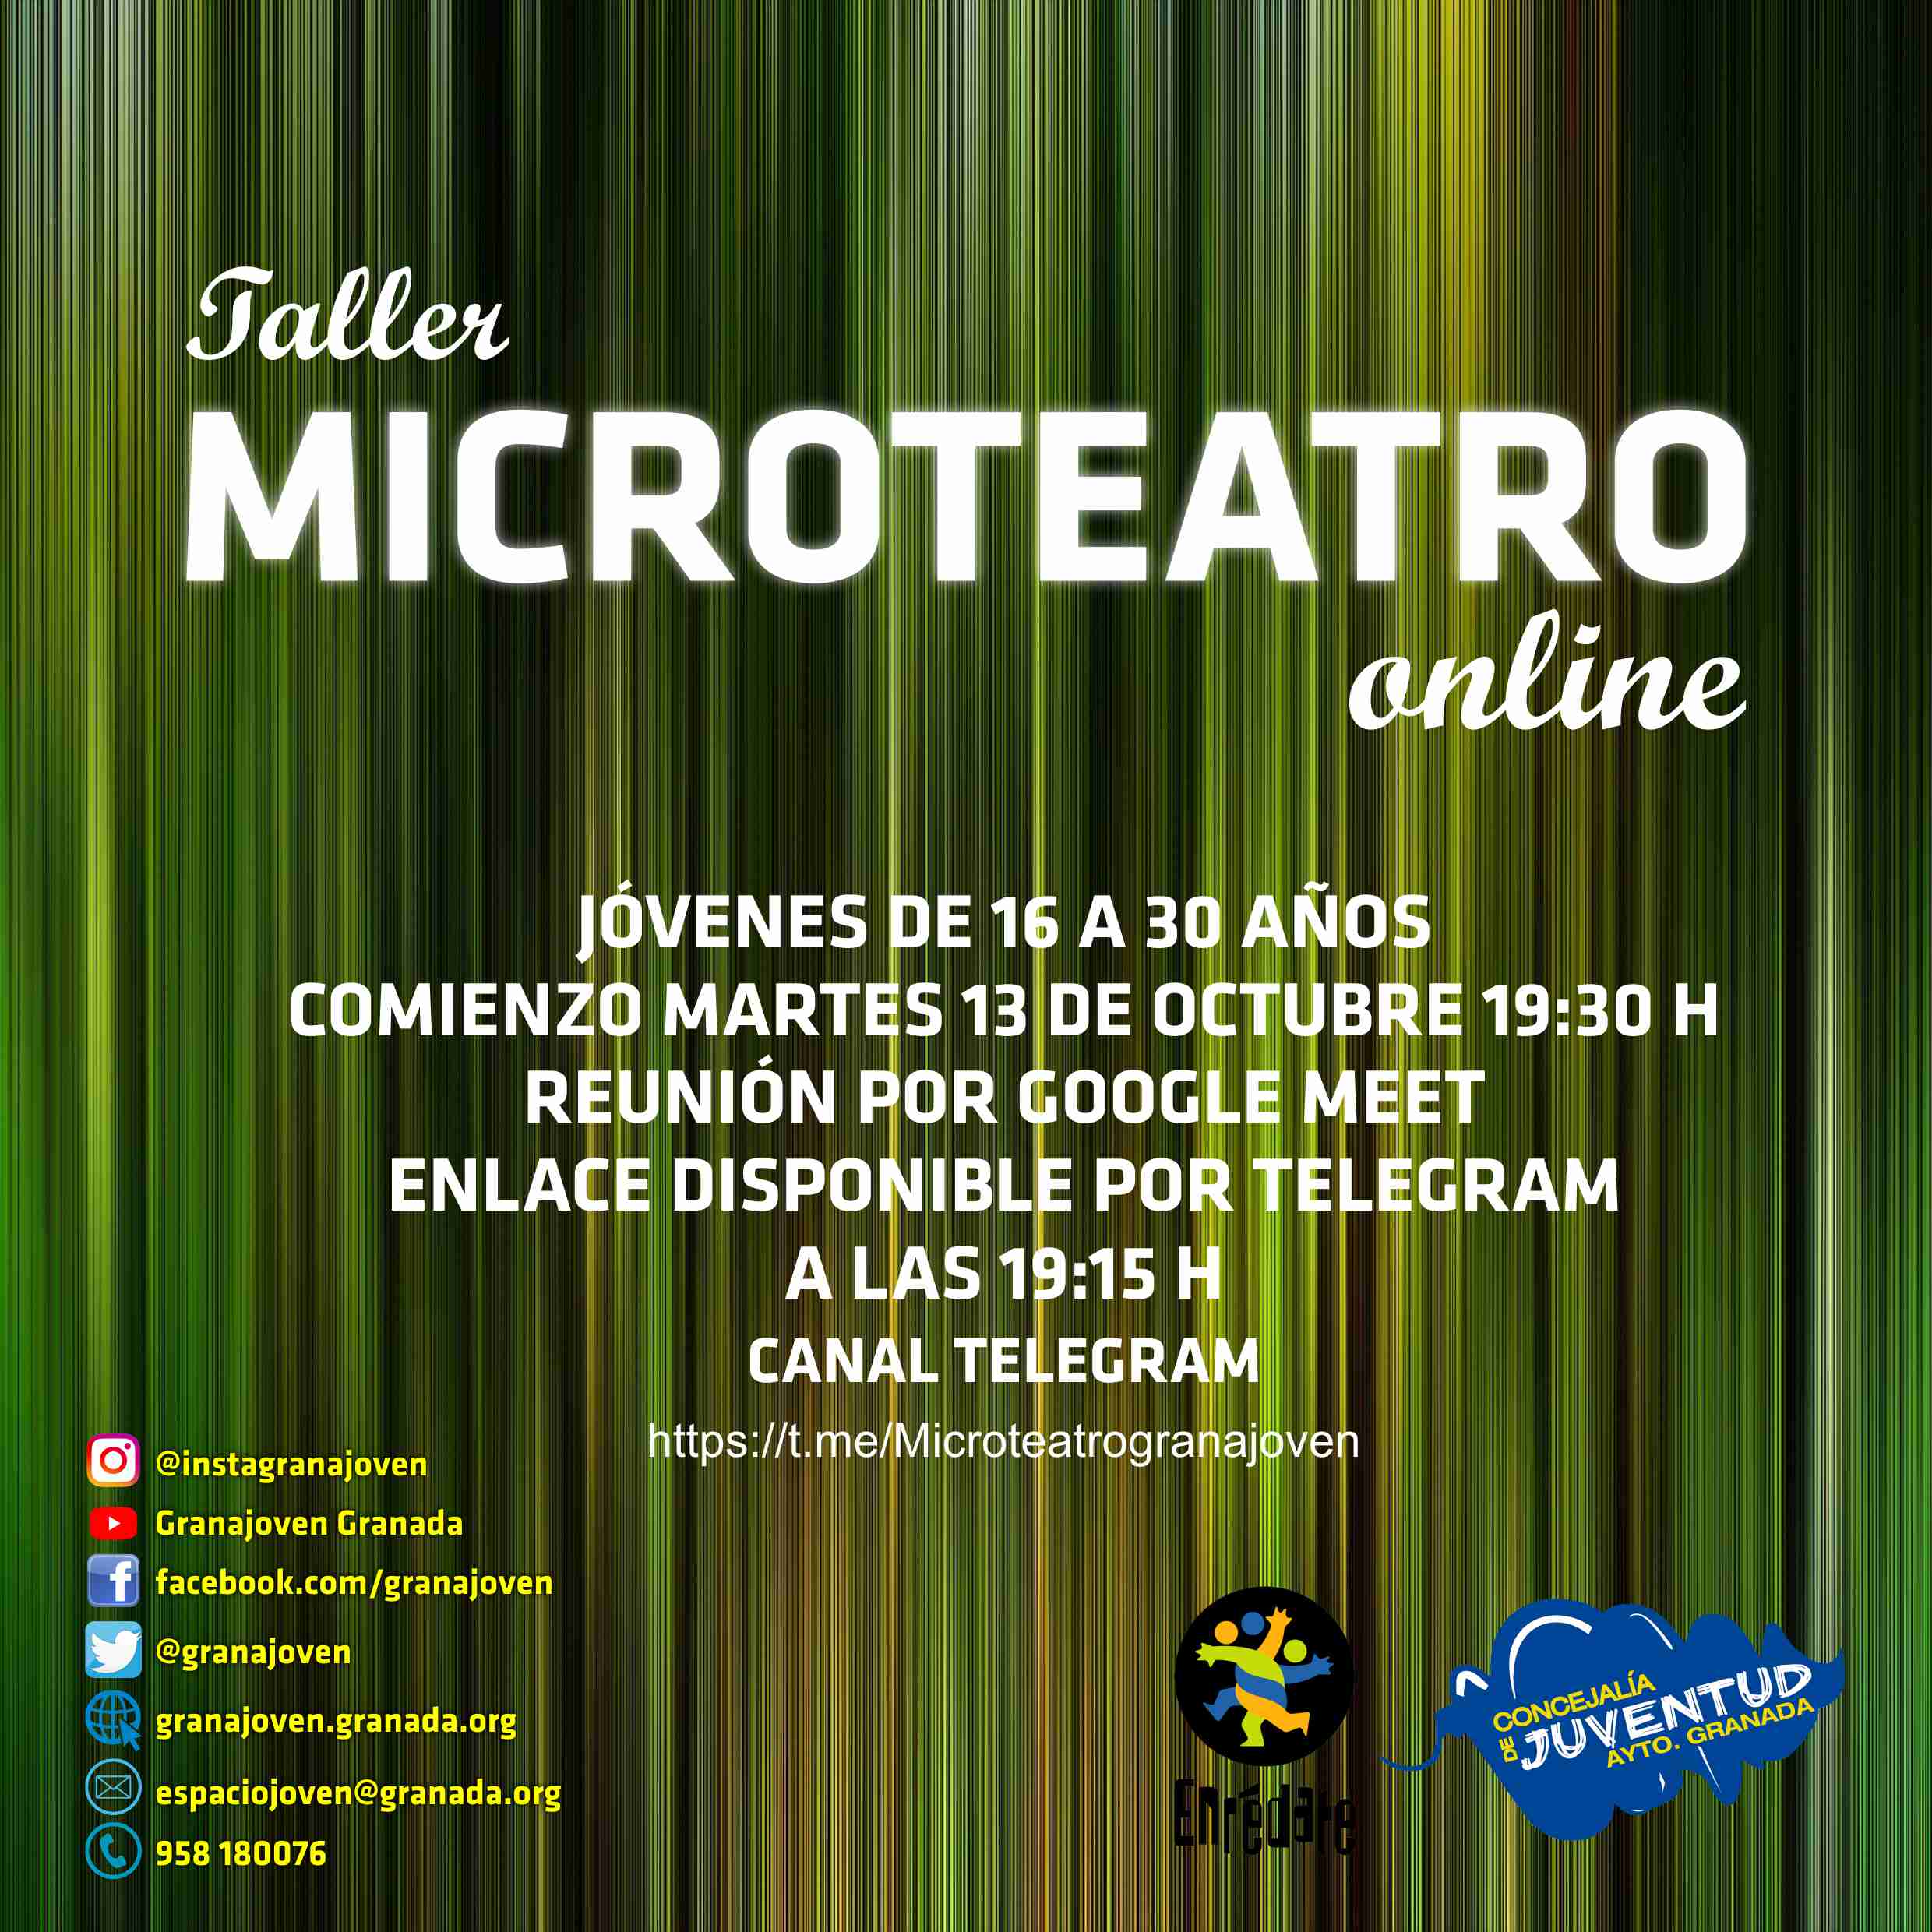 Taller Microteatro online